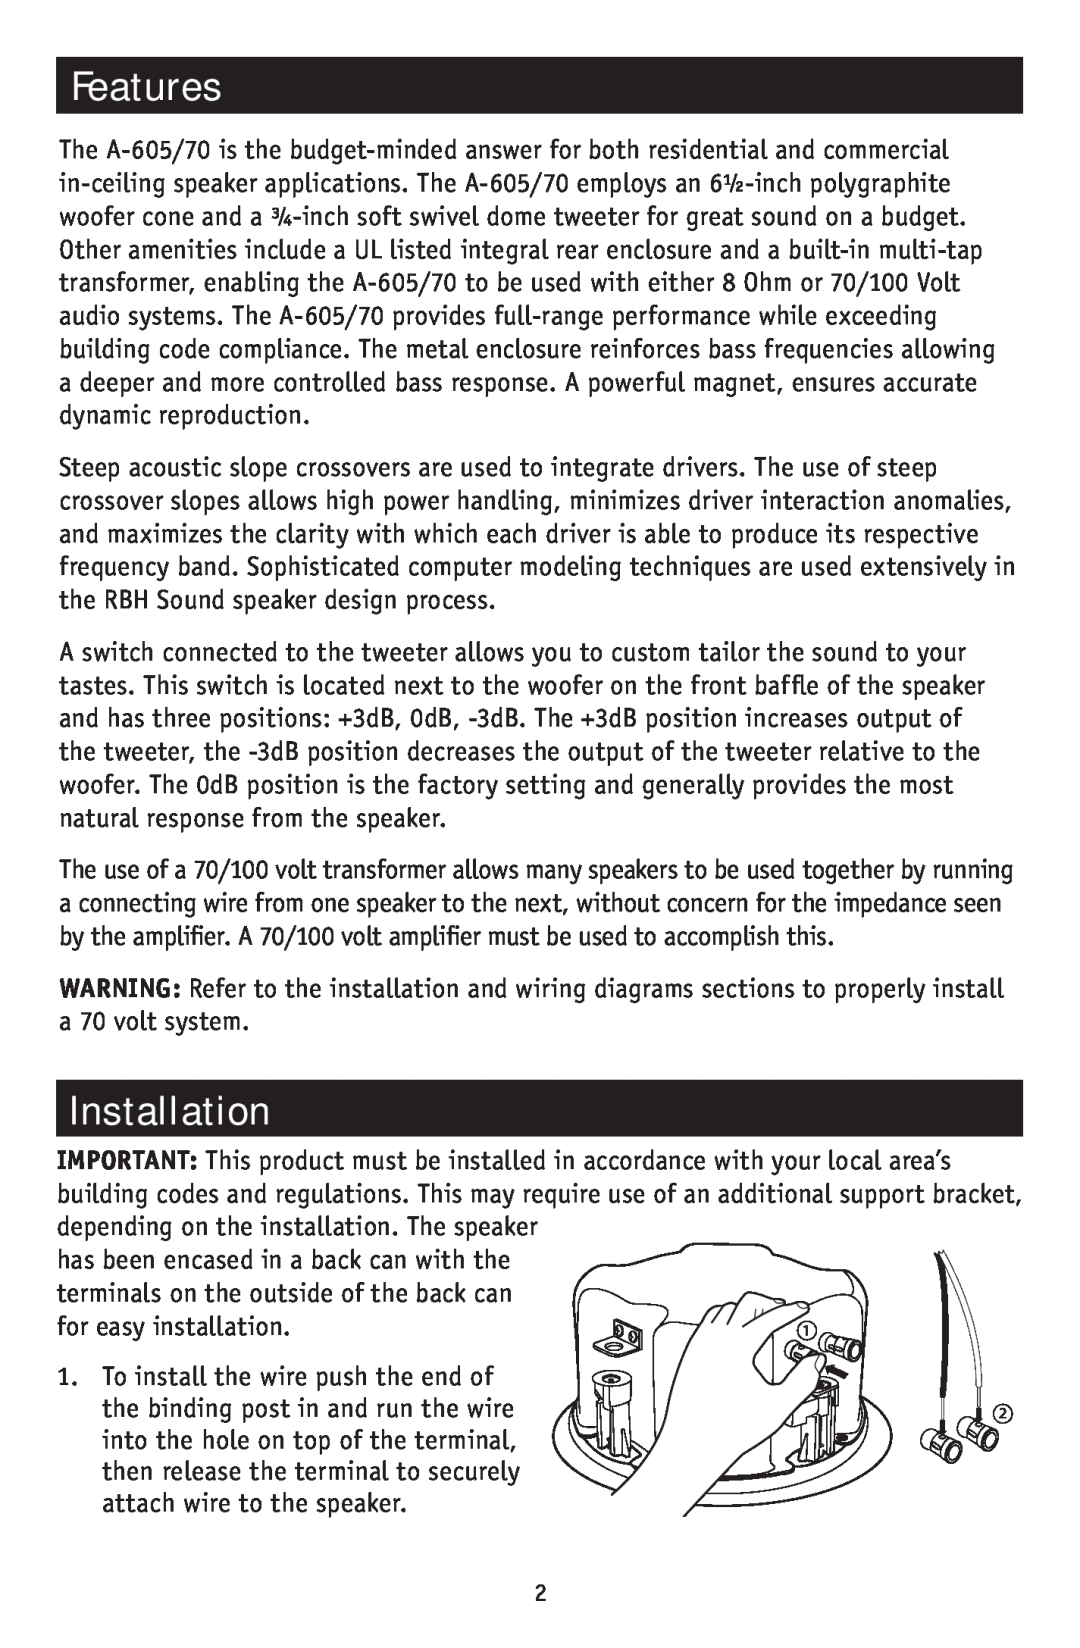 RBH Sound A-605/70 owner manual Features, Installation 